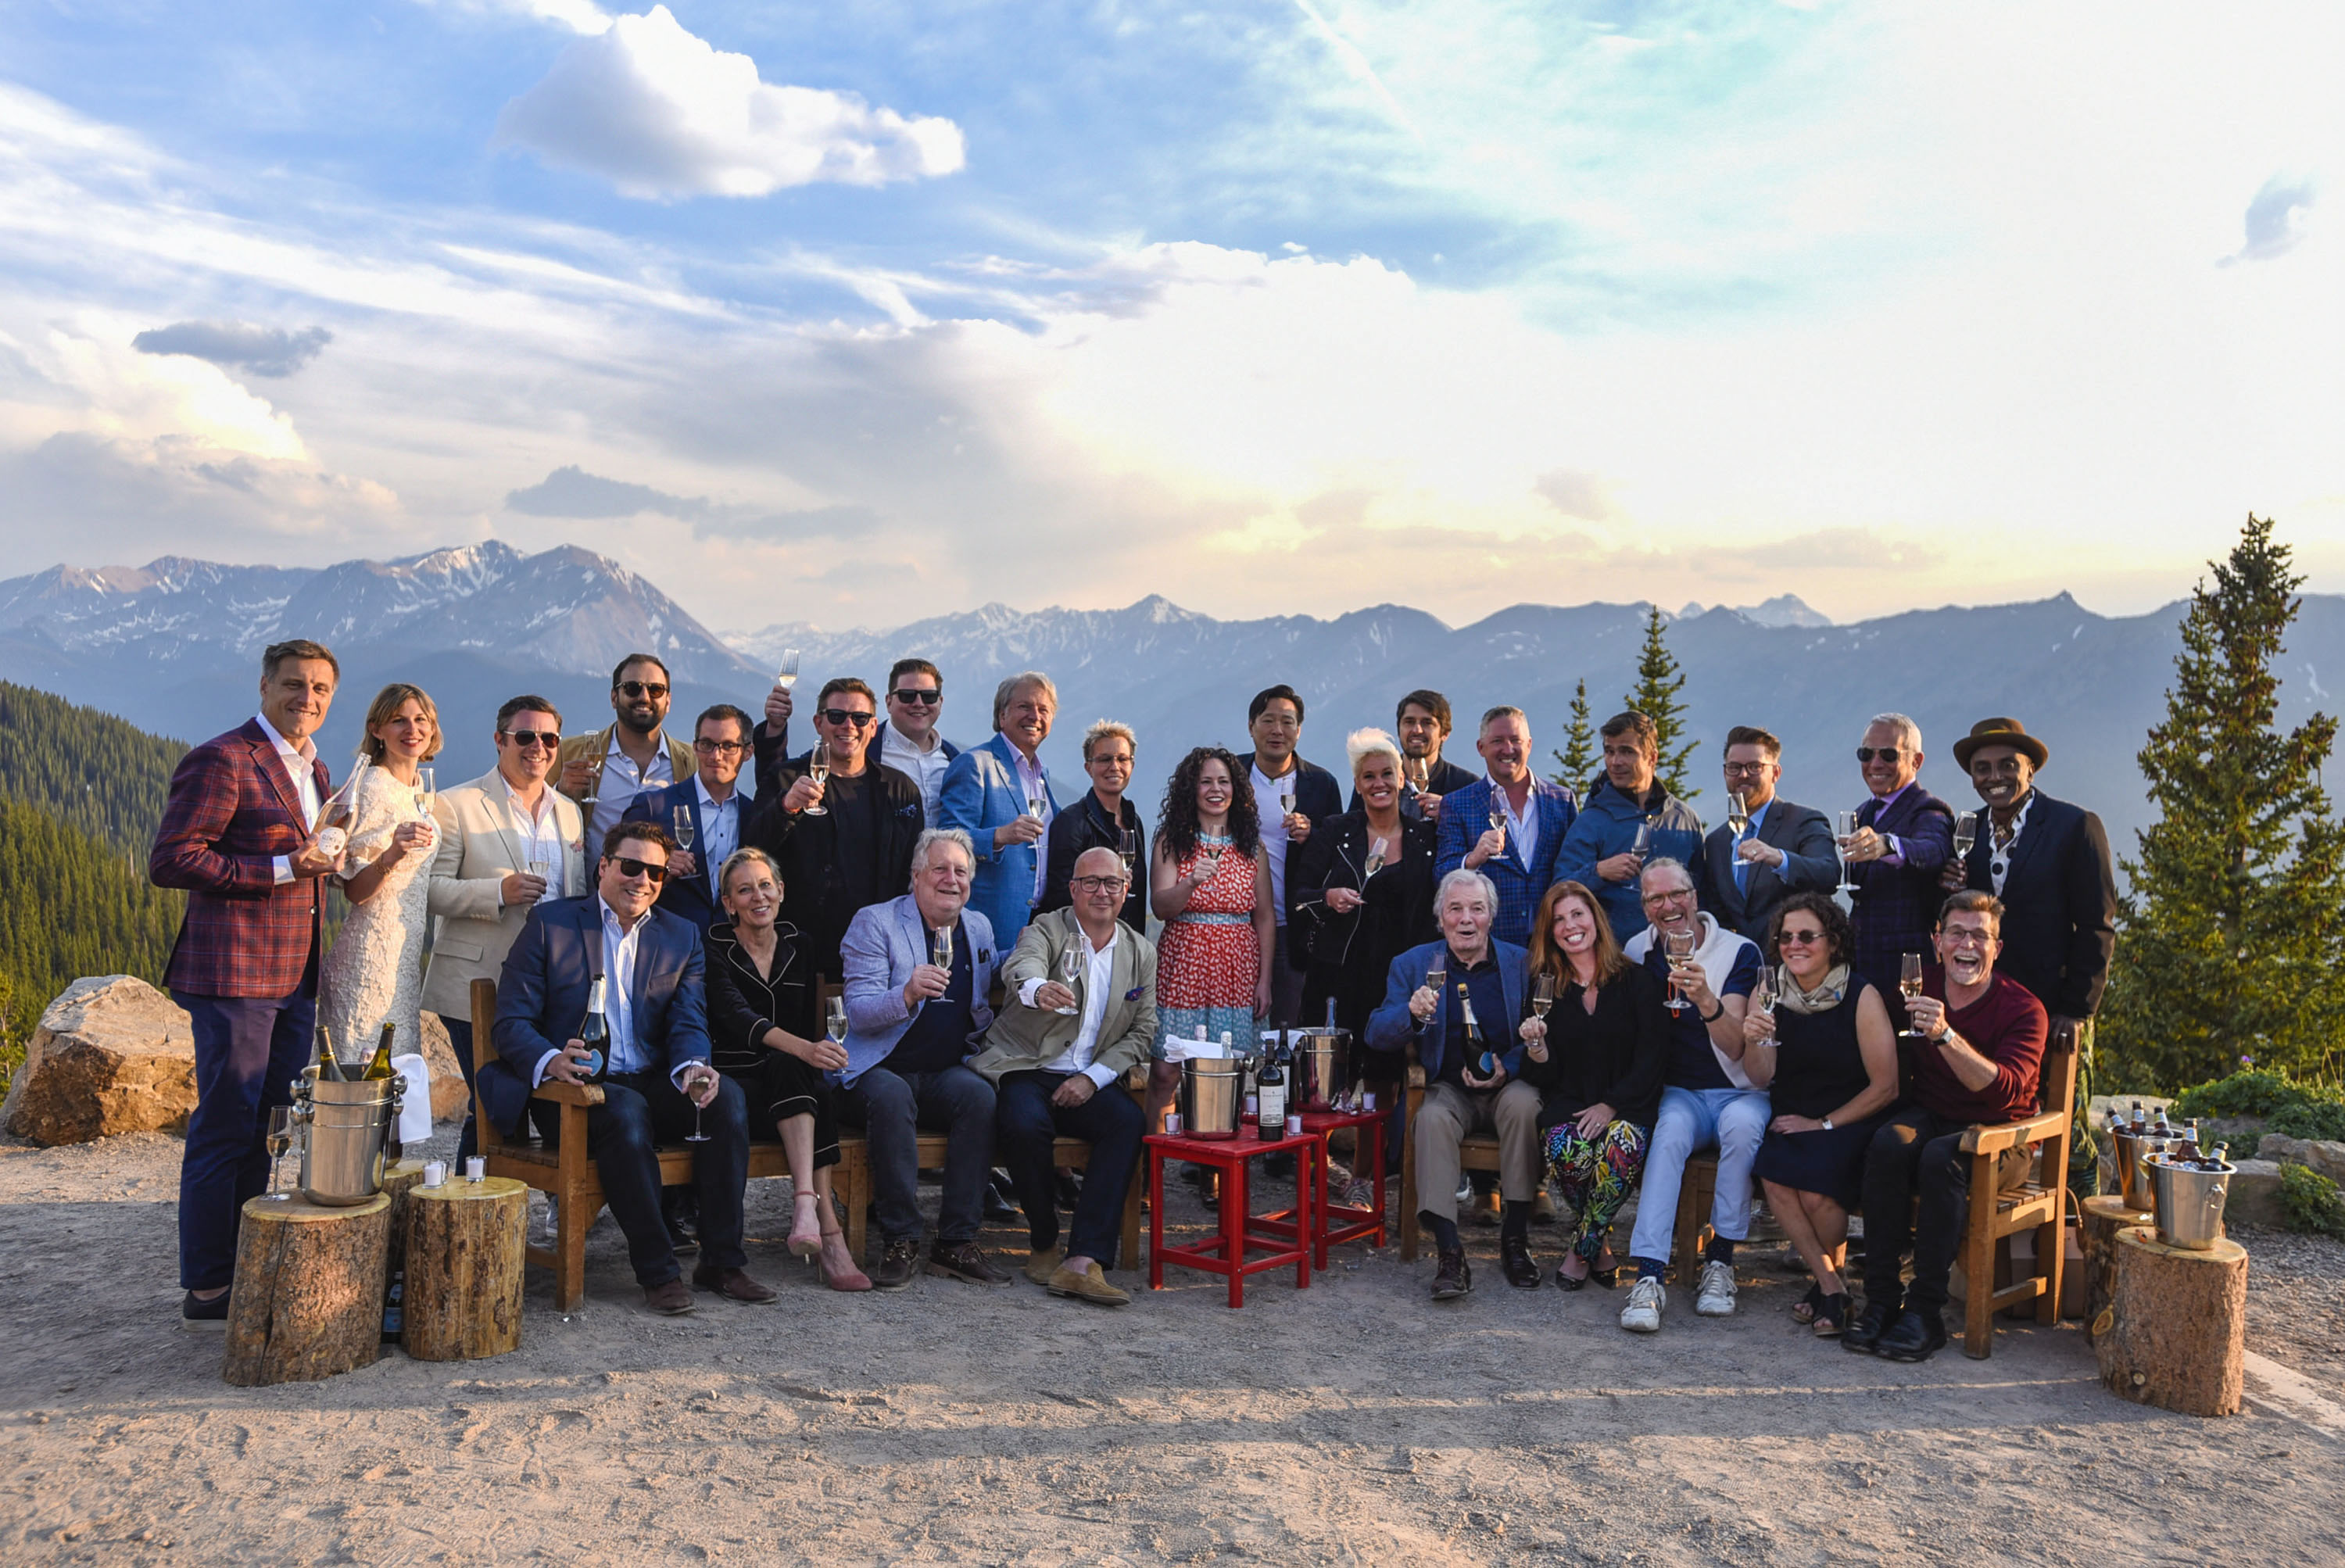 FOOD &amp; WINE Celebrates 36th annual FOOD &amp; WINE Classic in Aspen at the top of Aspen Mountain